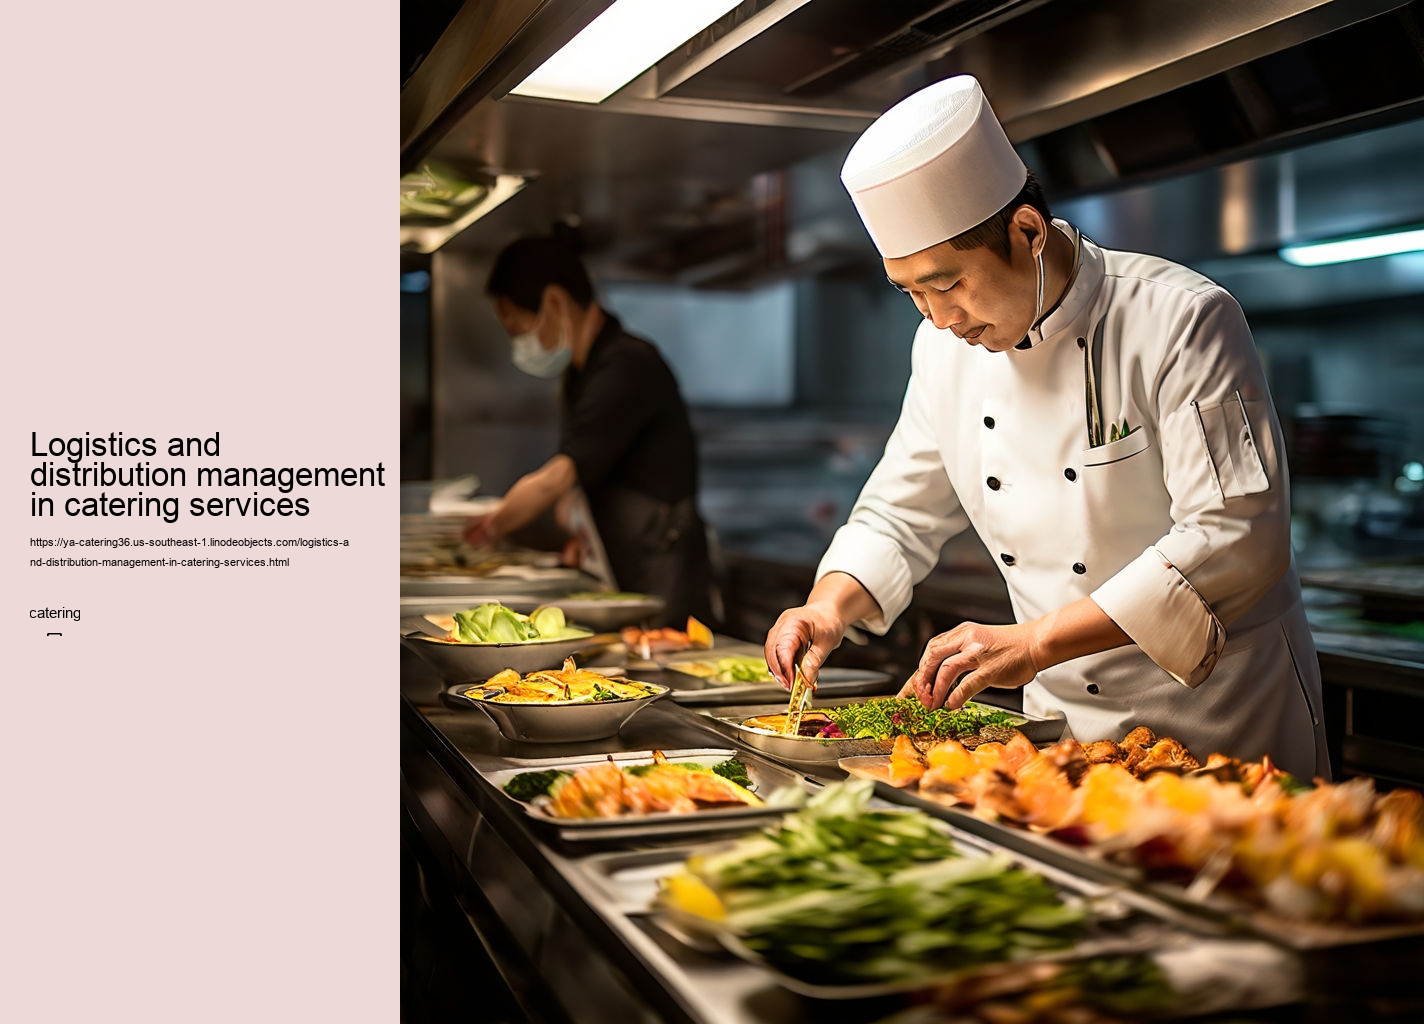 Logistics and distribution management in catering services